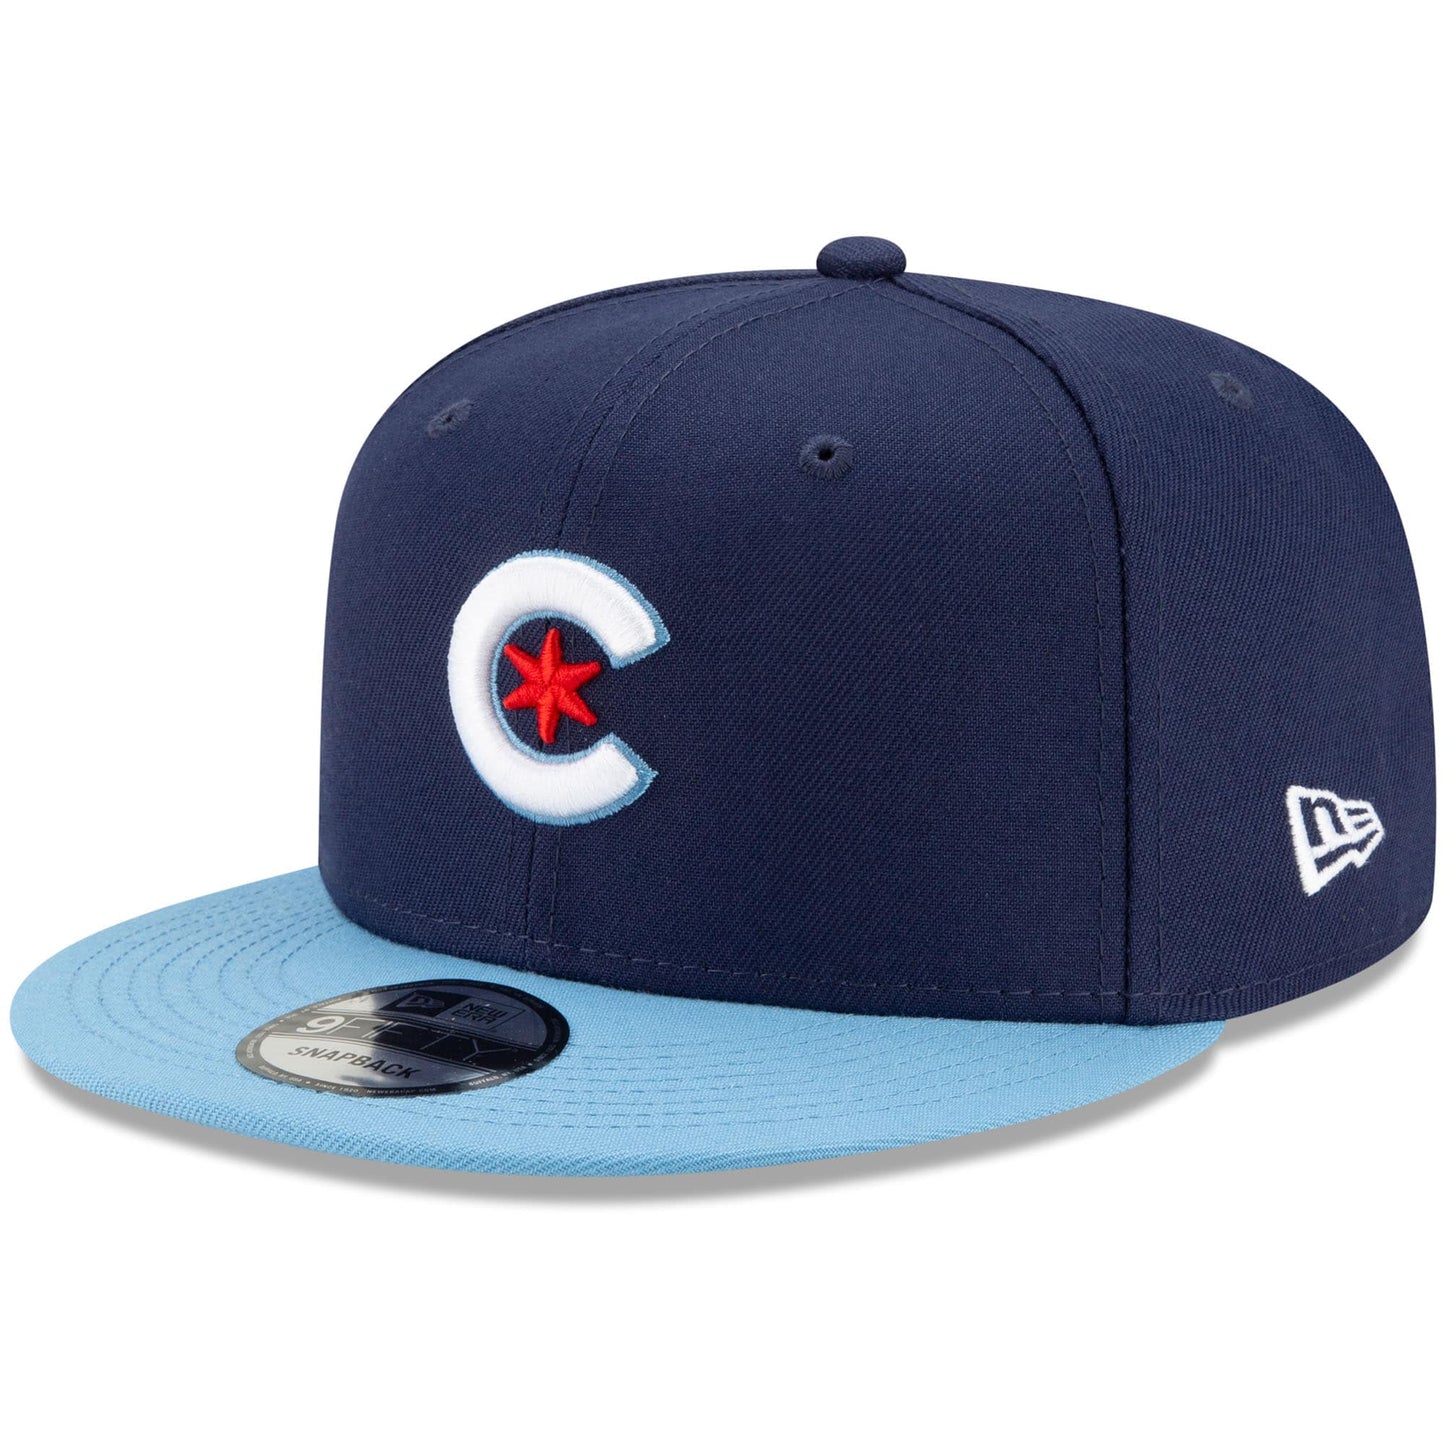 Chicago Cubs New Era 2021 City Connect 9FIFTY Snapback Adjustable Hat - Navy/Light Blue